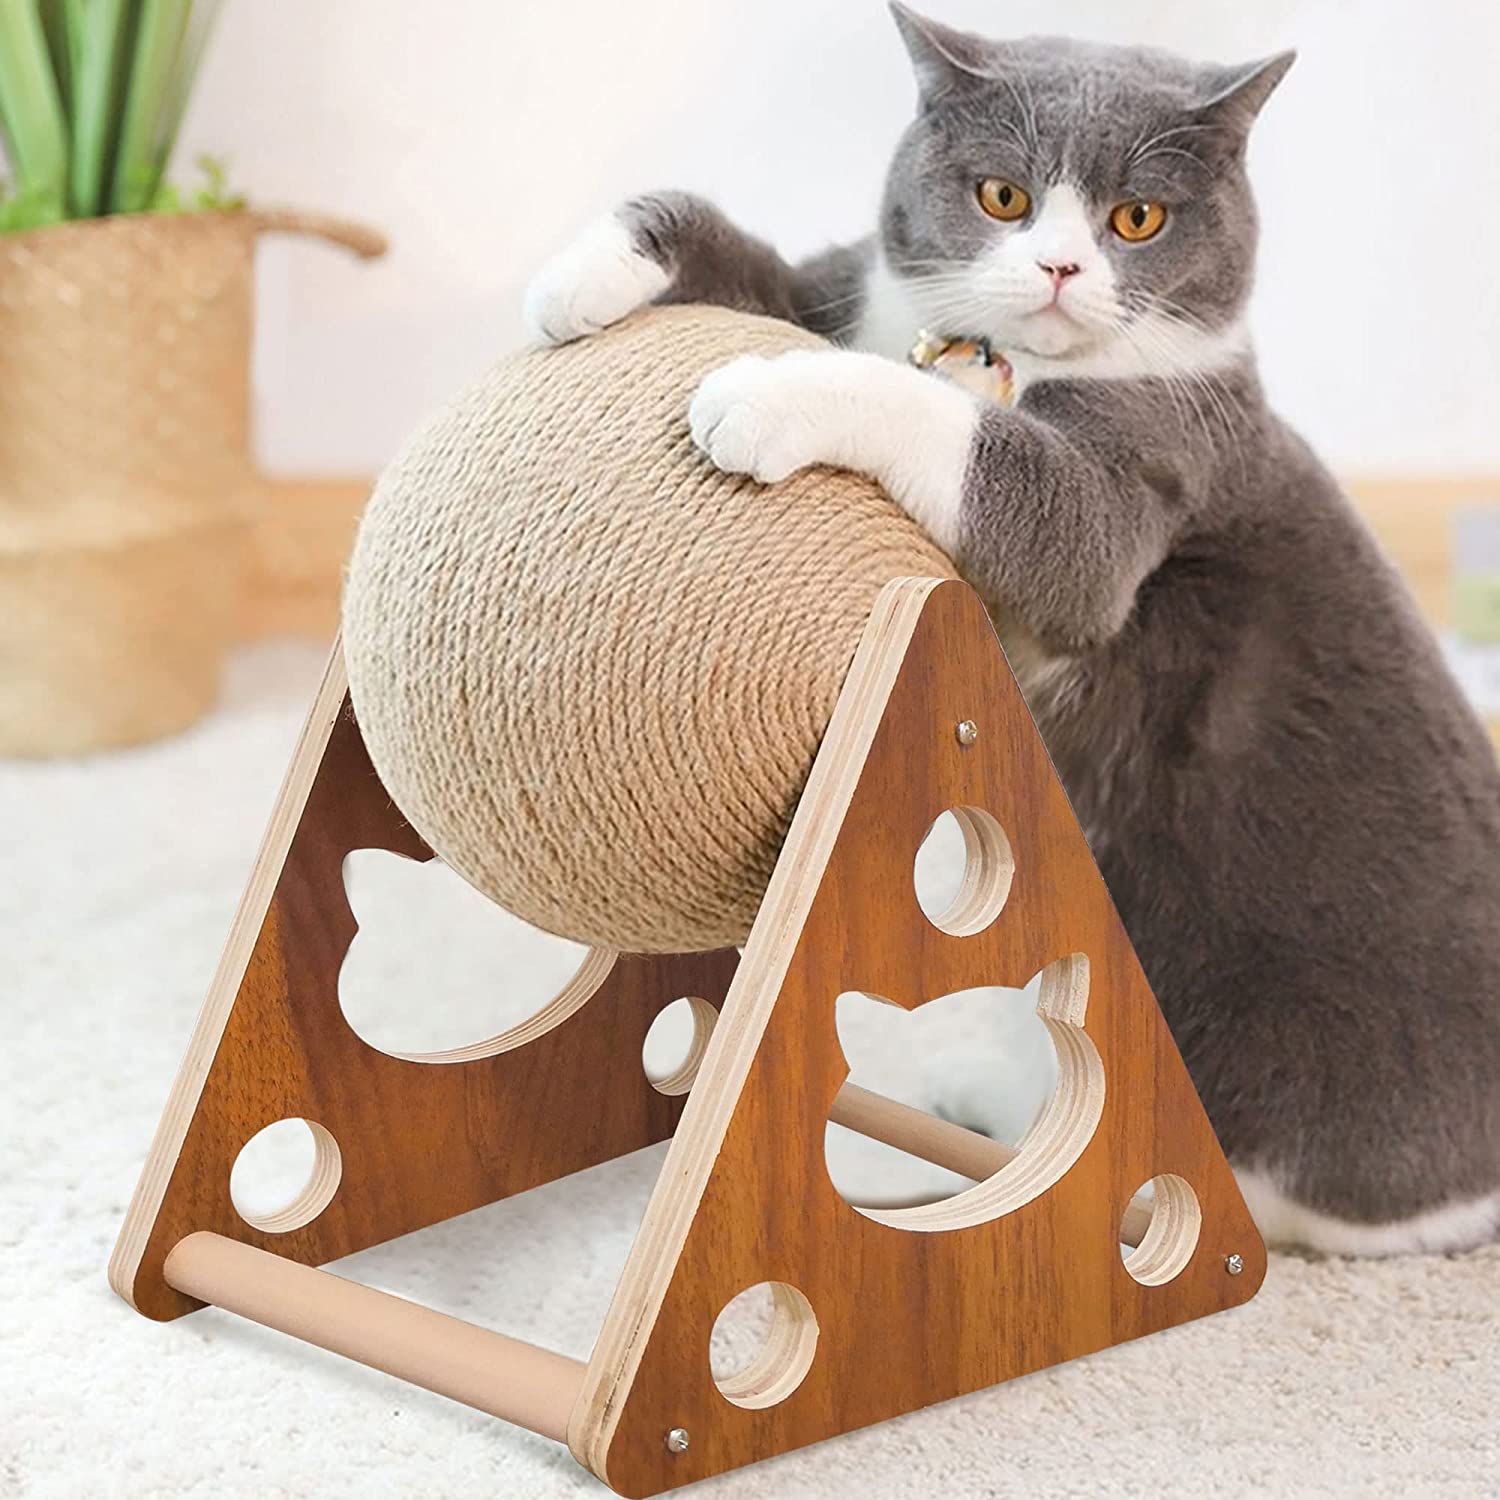 AGYM Natural Sisal Cat Scratcher Toy with Ball